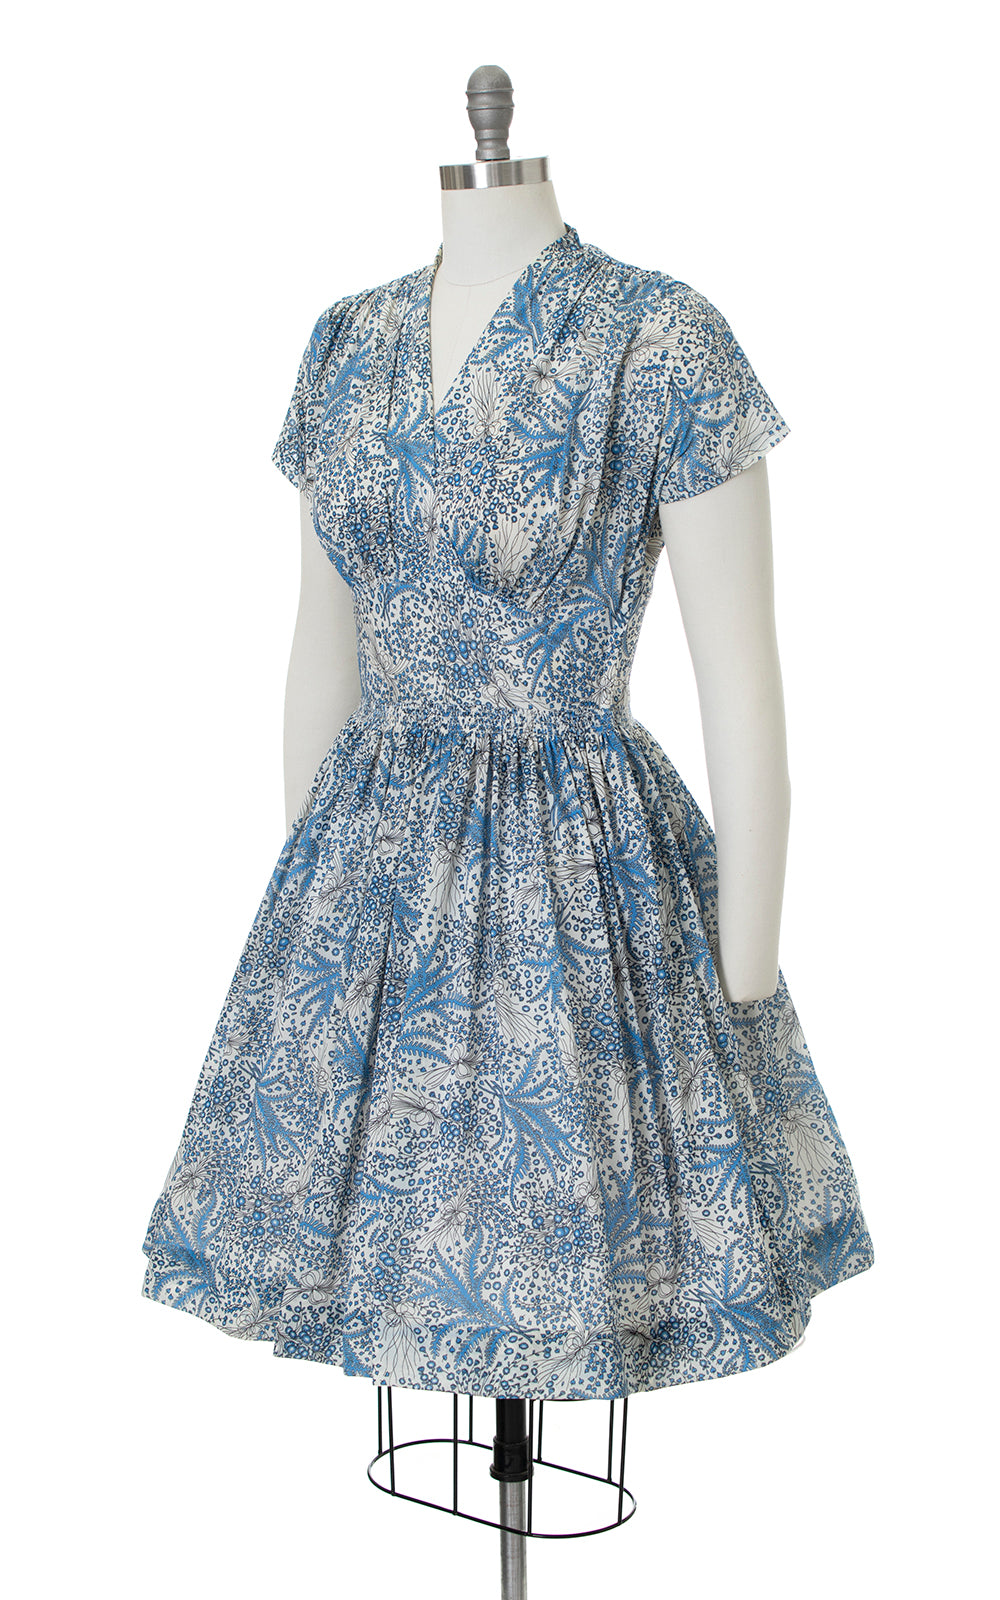 Vintage 1940s Floral Bouquet + Fern Print Jersey Dress by Birthday Life Vintage